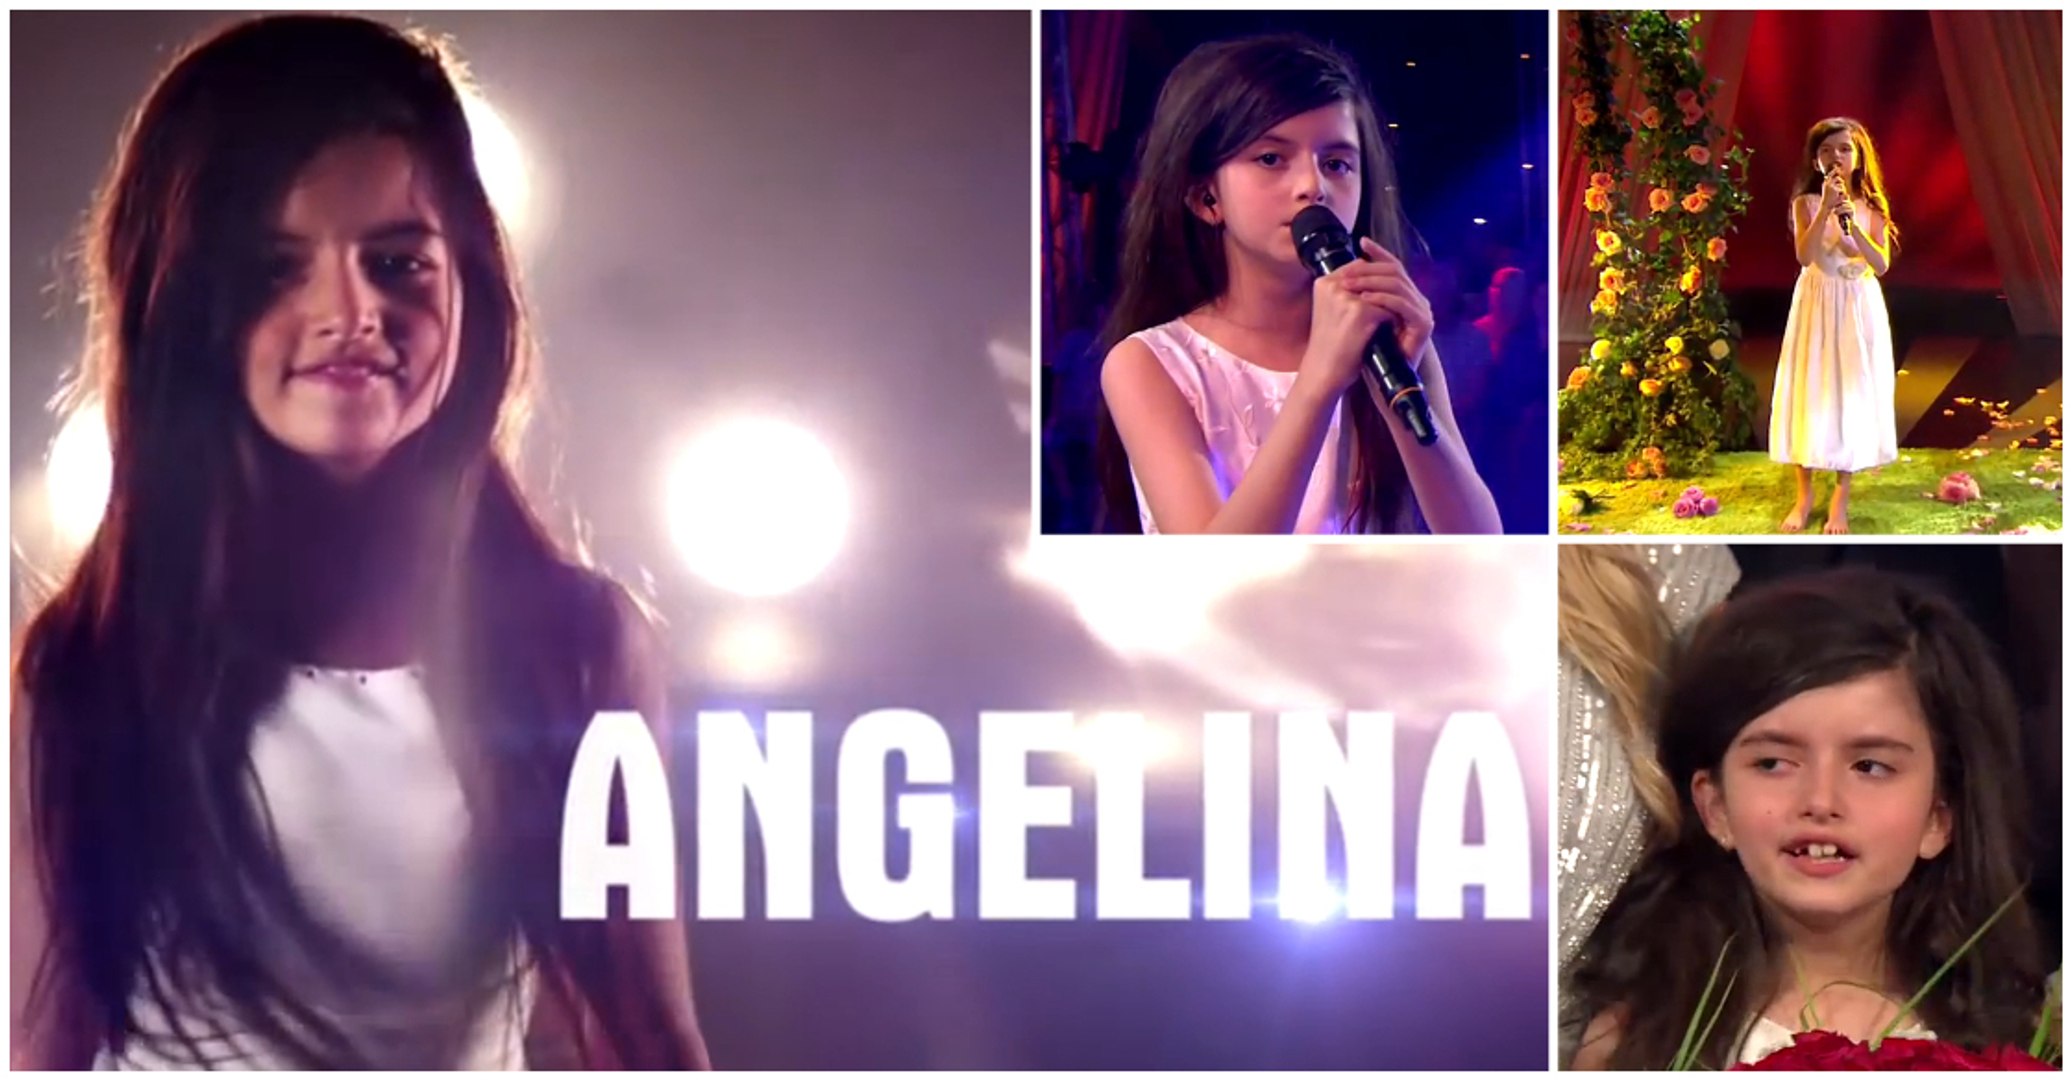 Amazing 8-year-old Angelina Norway's Got Talent - video Dailymotion